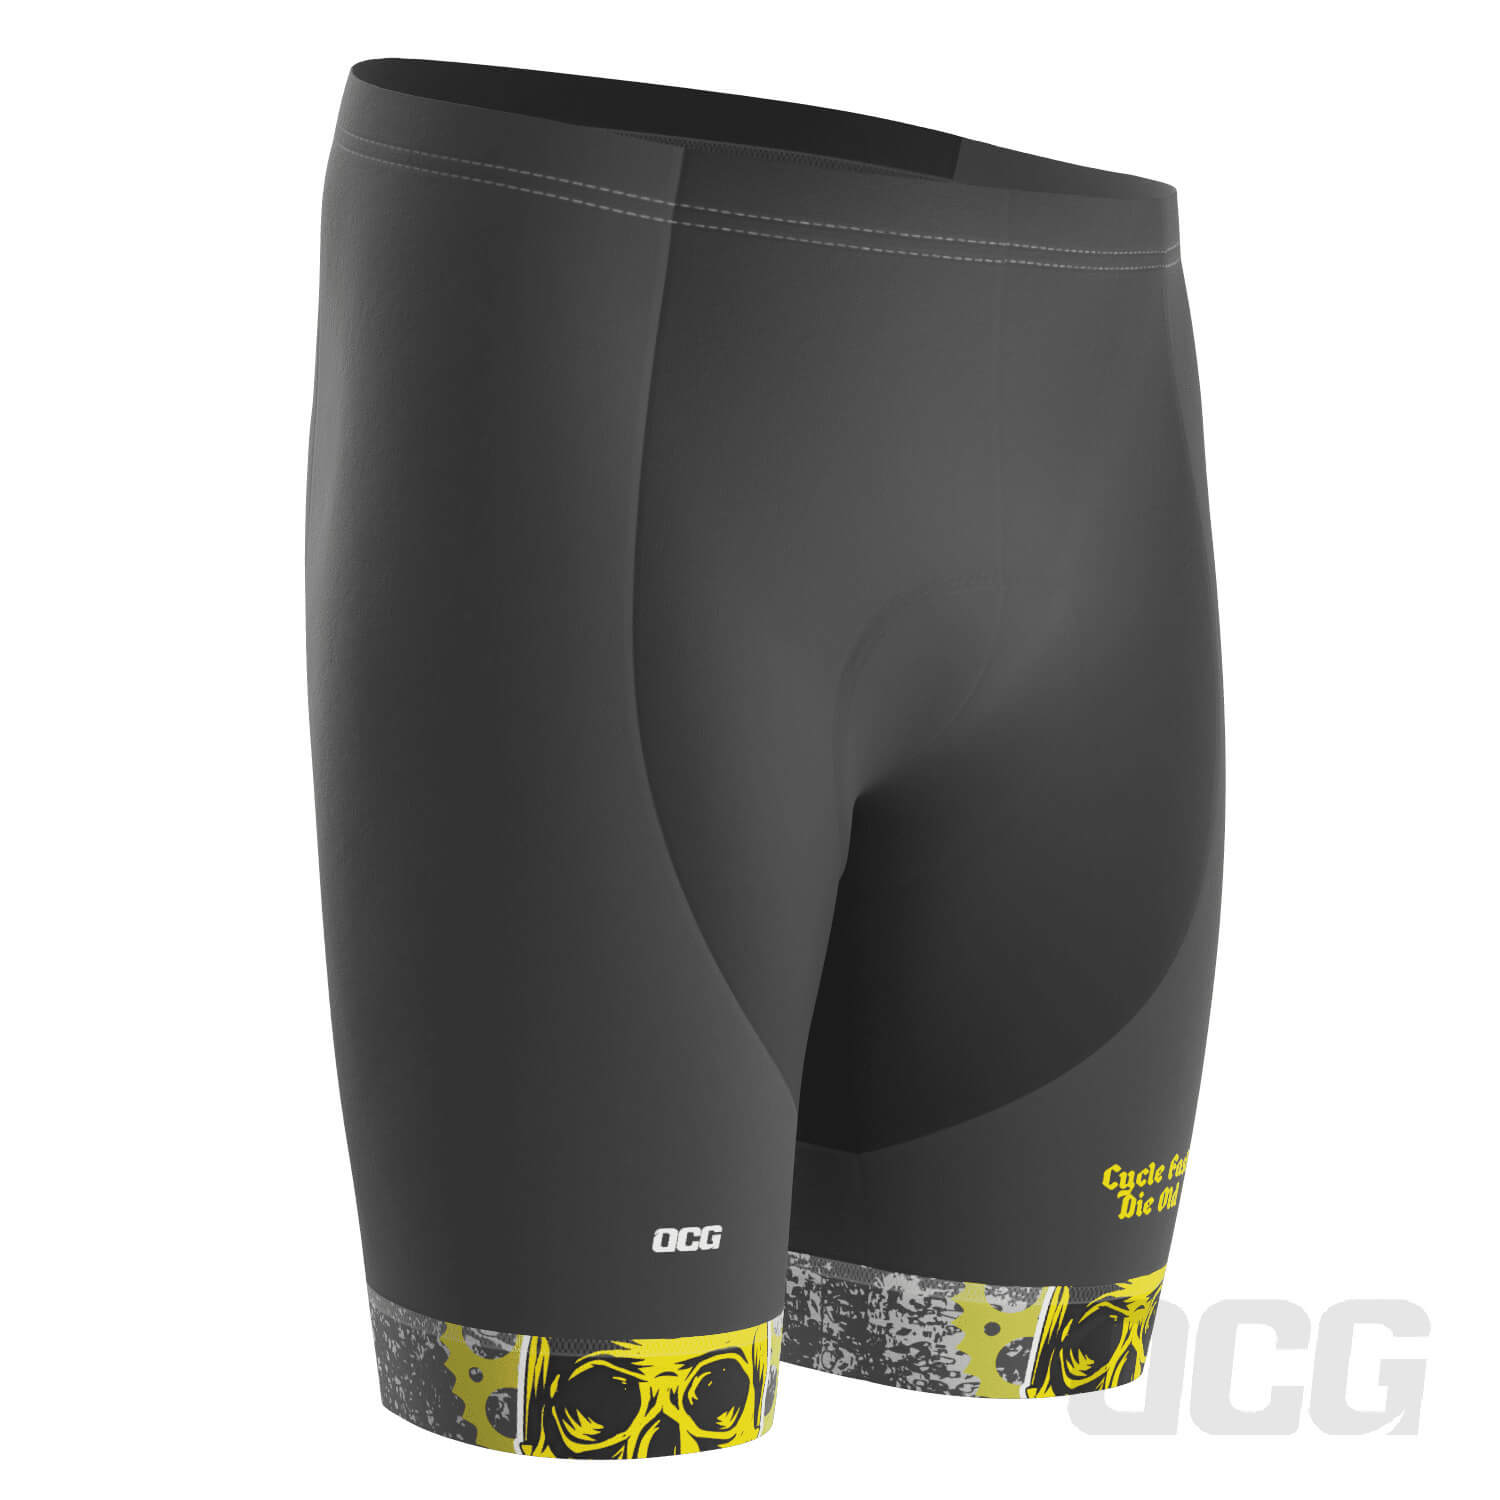 Men's Cycle Fast Die Old Gel Padded Cycling Shorts